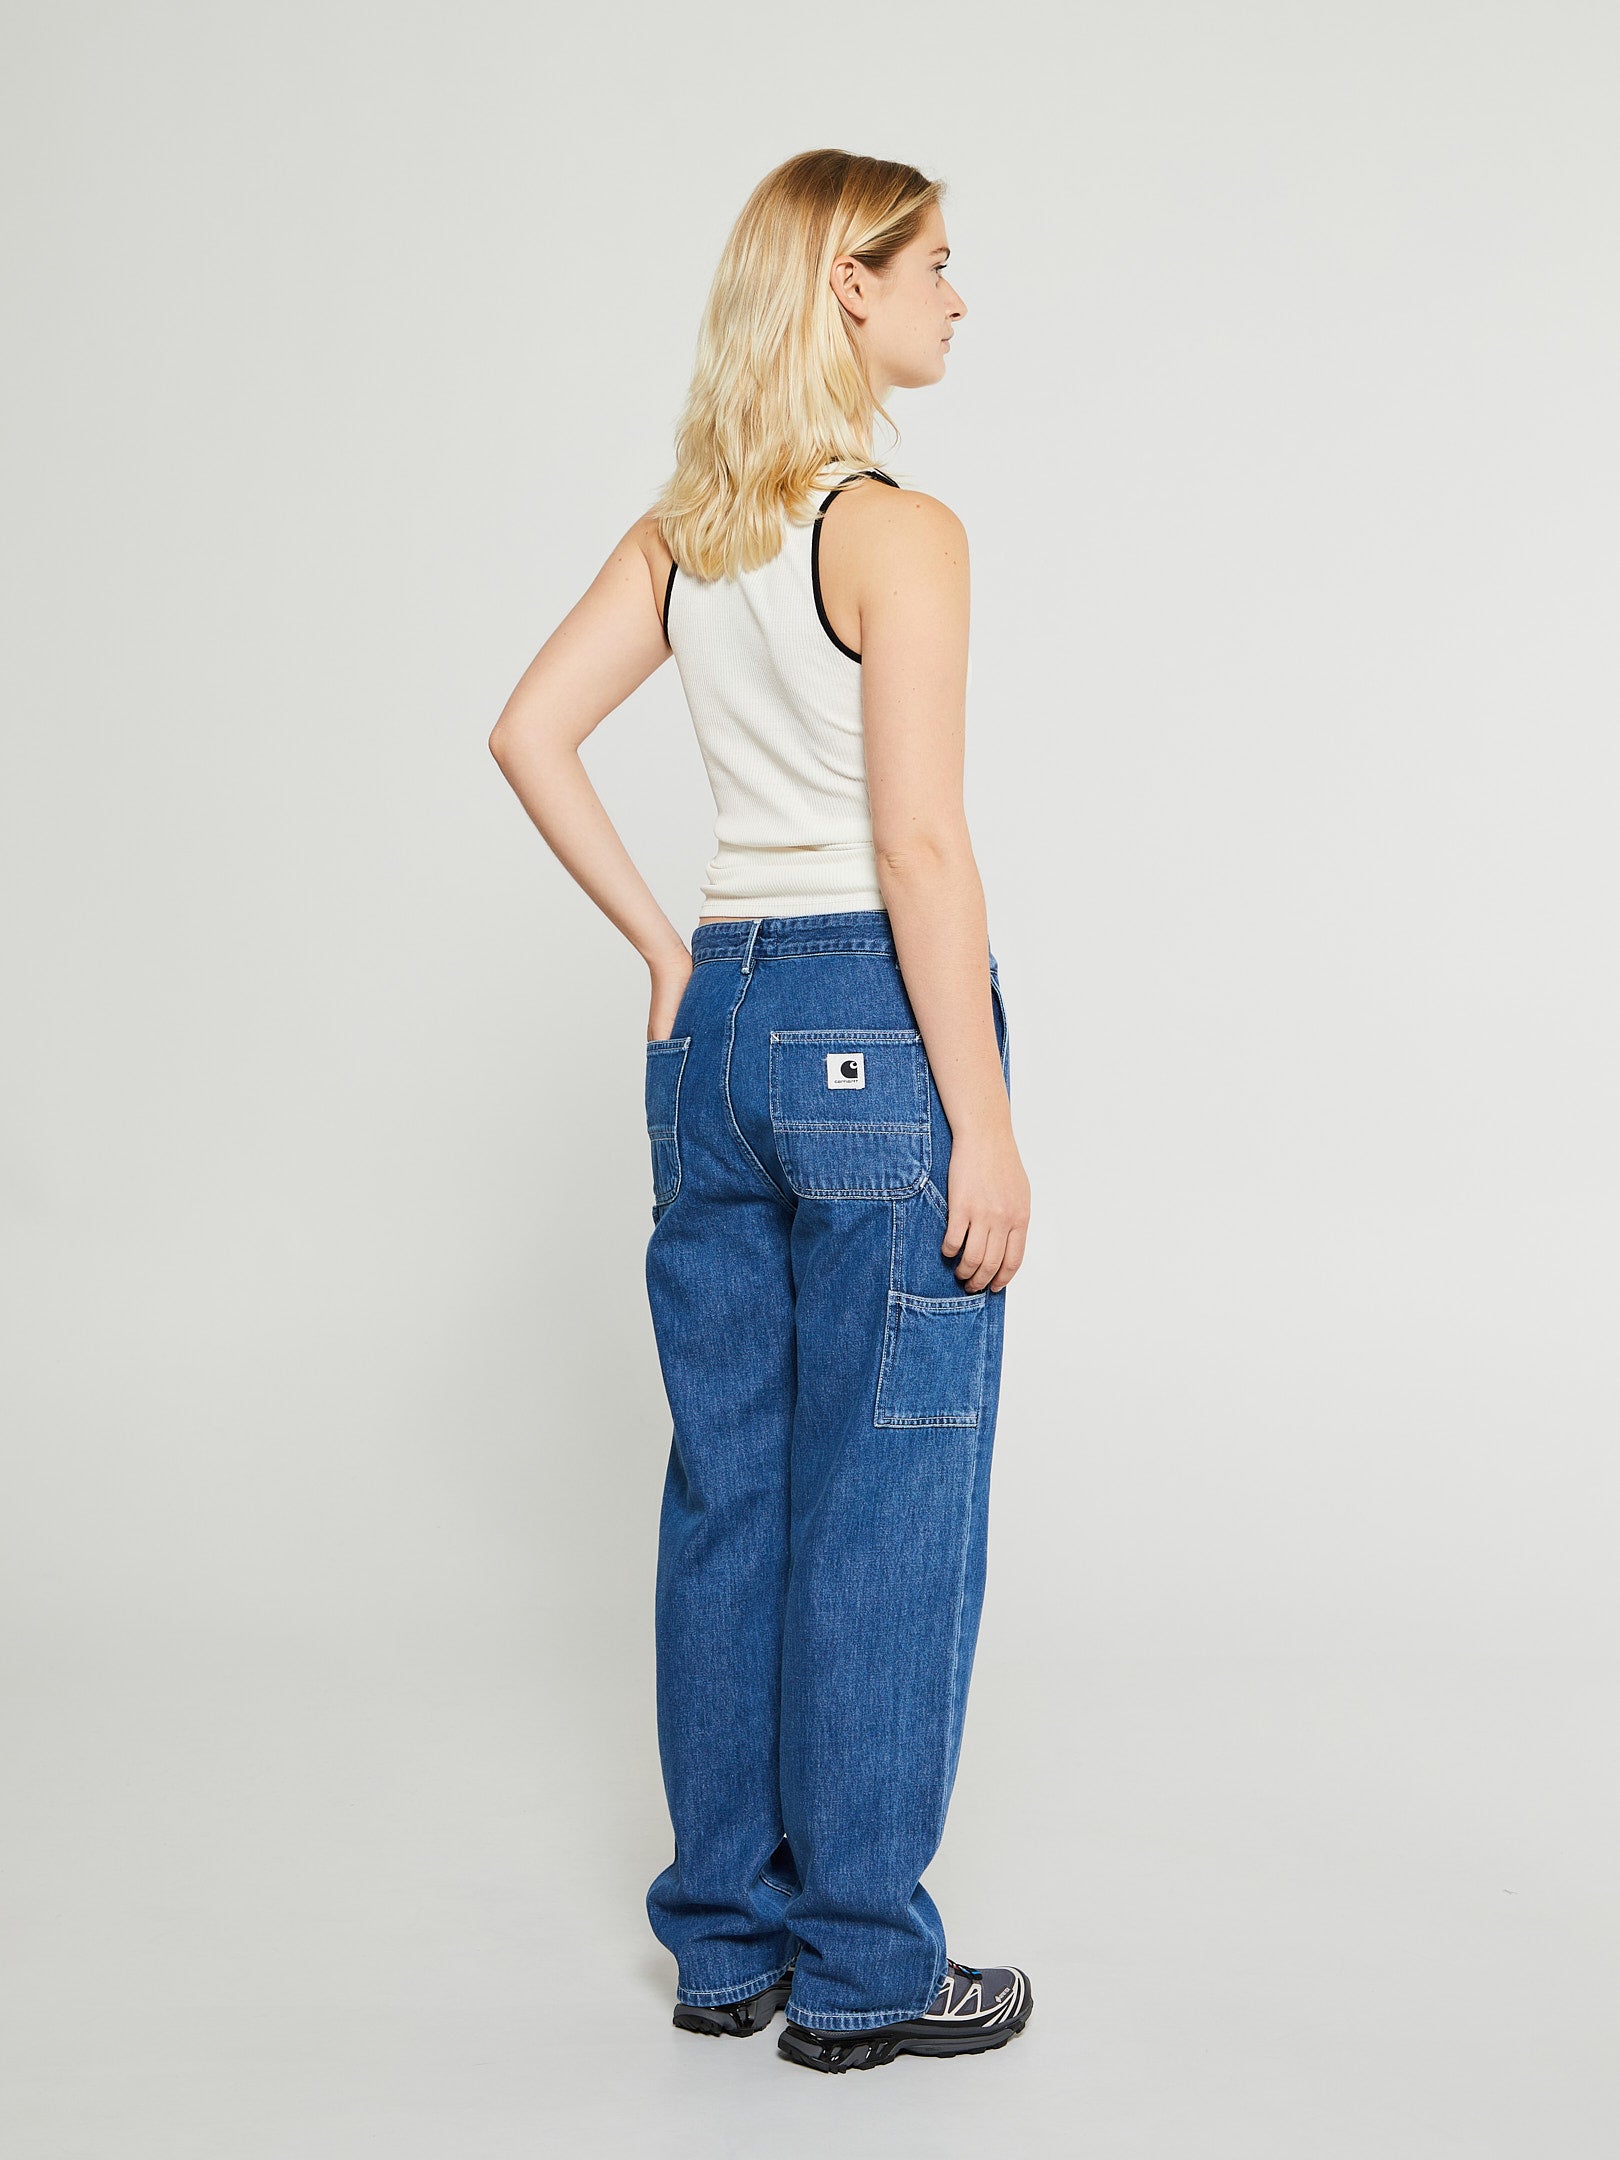 Carhartt WIP - W' Pierce Pant Straight in Blue Stone Washed – stoy